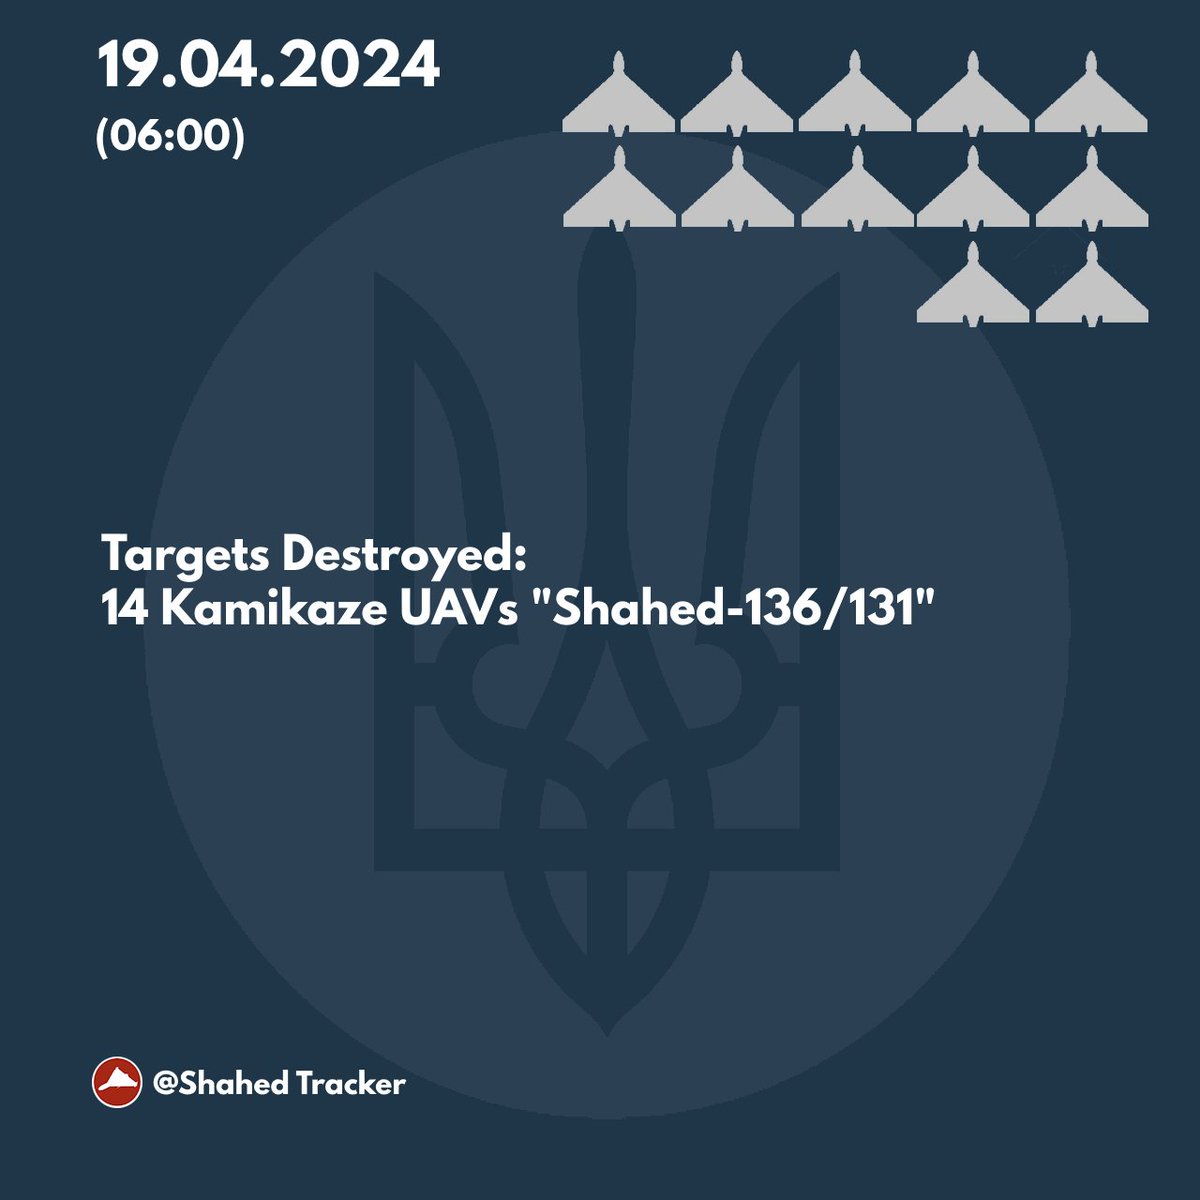 1/6🧵Shahed Attacks: Night of 18-19APR2024

A total of 14 Shahed type UAVs were launched from the Primorsko-Akhtarsk district and Kursk Oblast.
A total of 14 were claimed destroyed:
9 in Dnipropetrovsk 
3 in Odesa